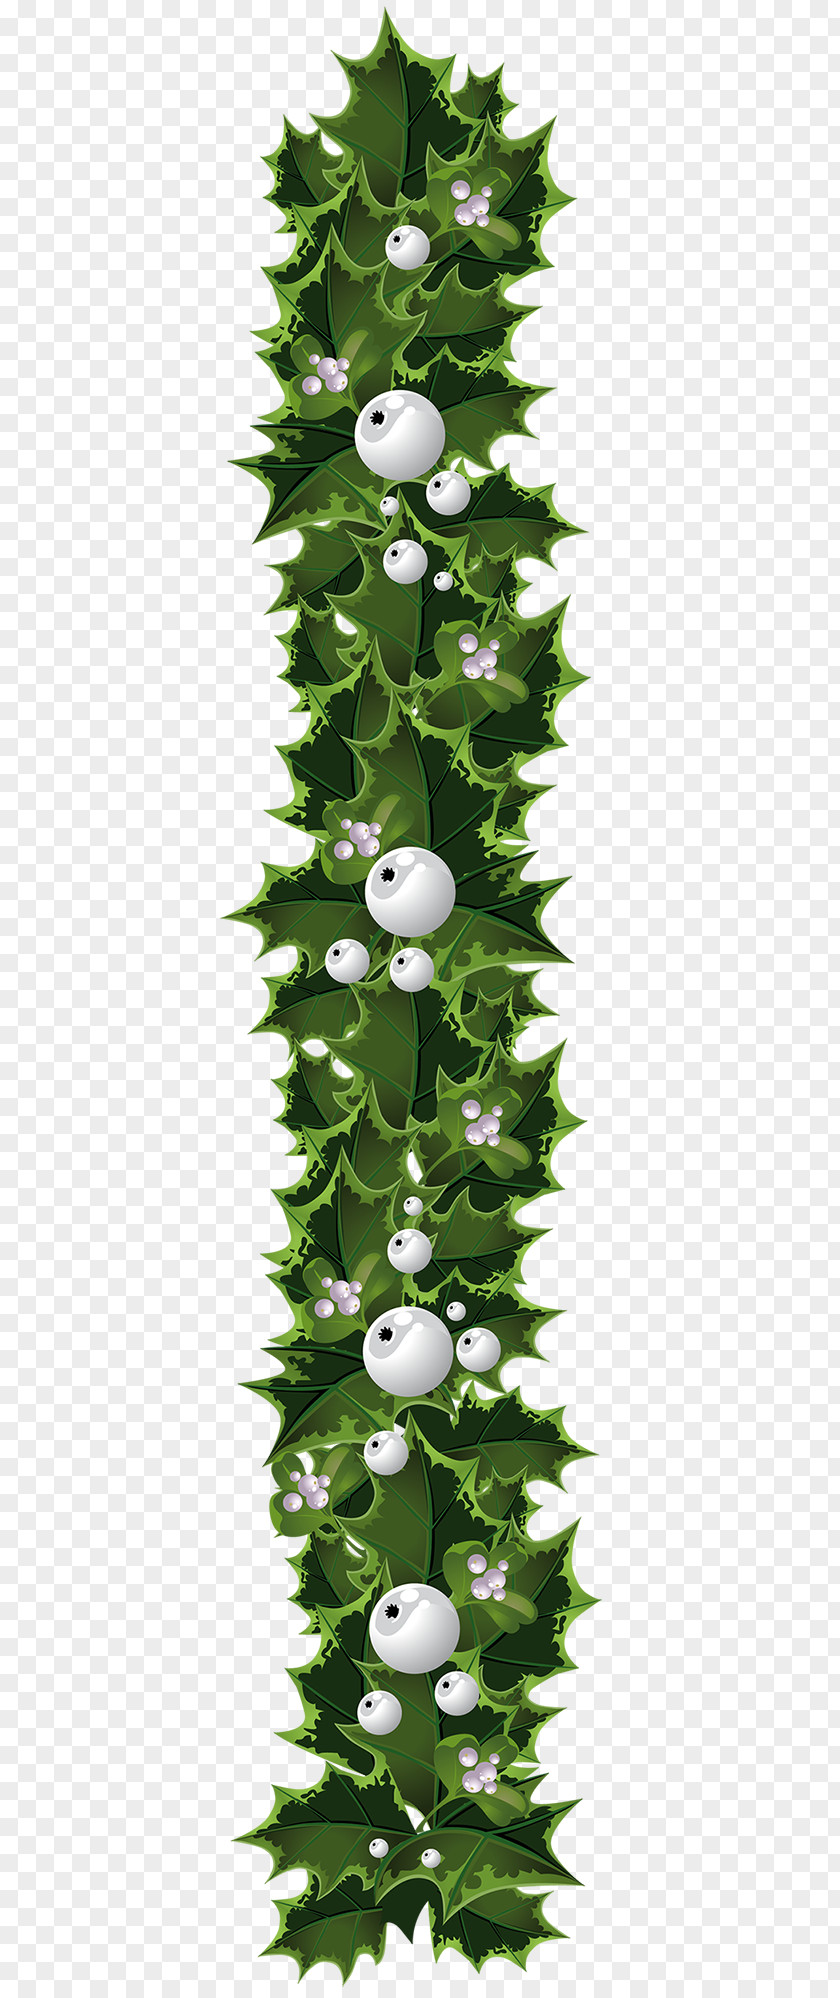 Pine Cone Garland Christmas Wreath Clip Art PNG